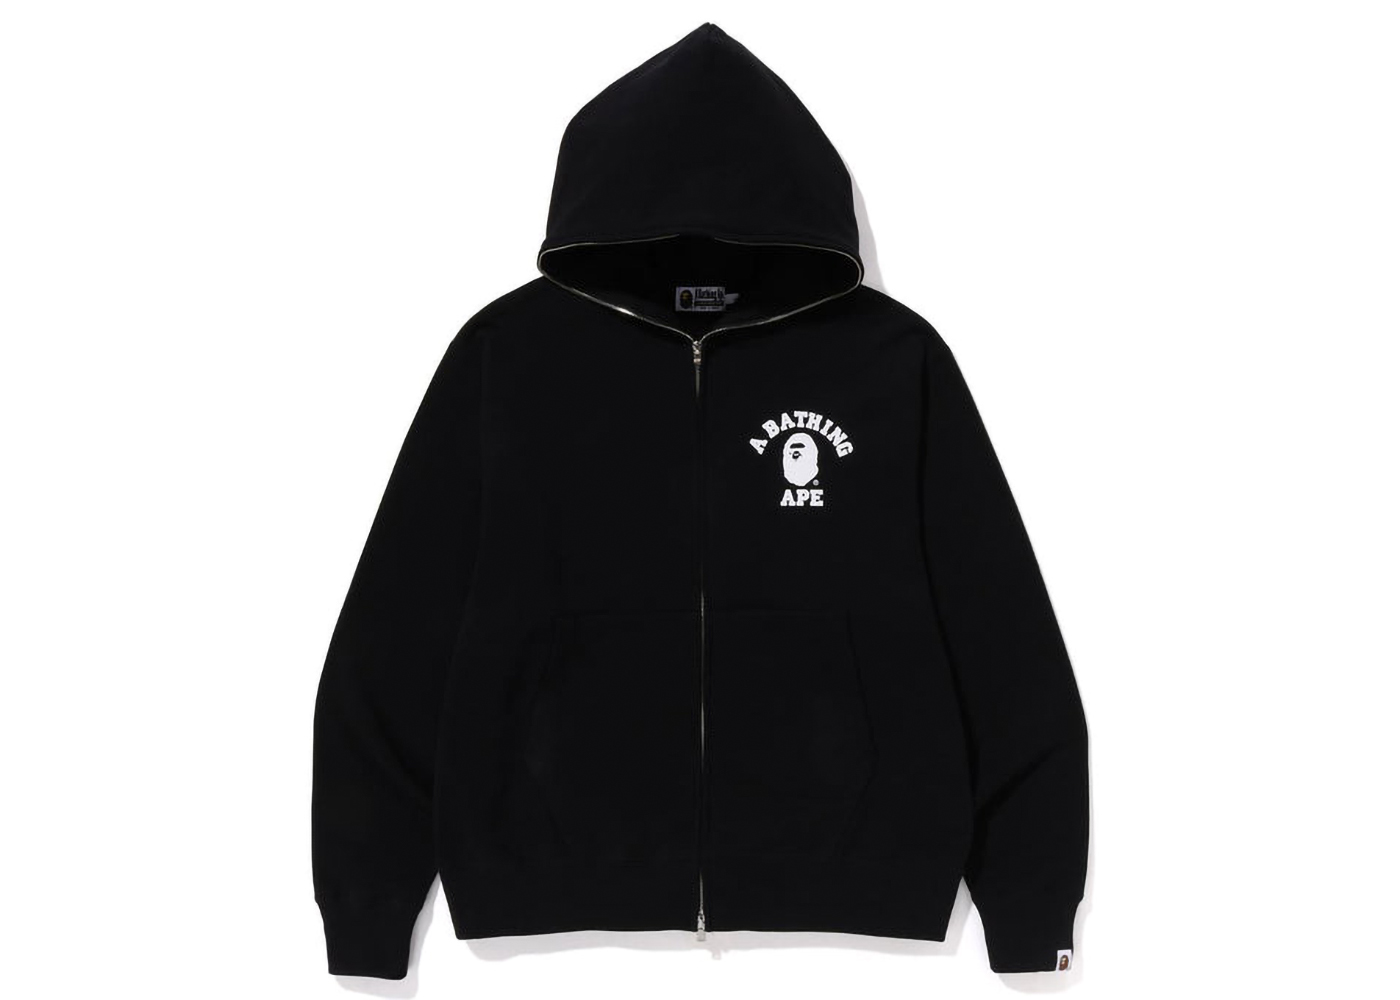 BAPE College Gradation Relaxed Fit Full Zip Hoodie Blue